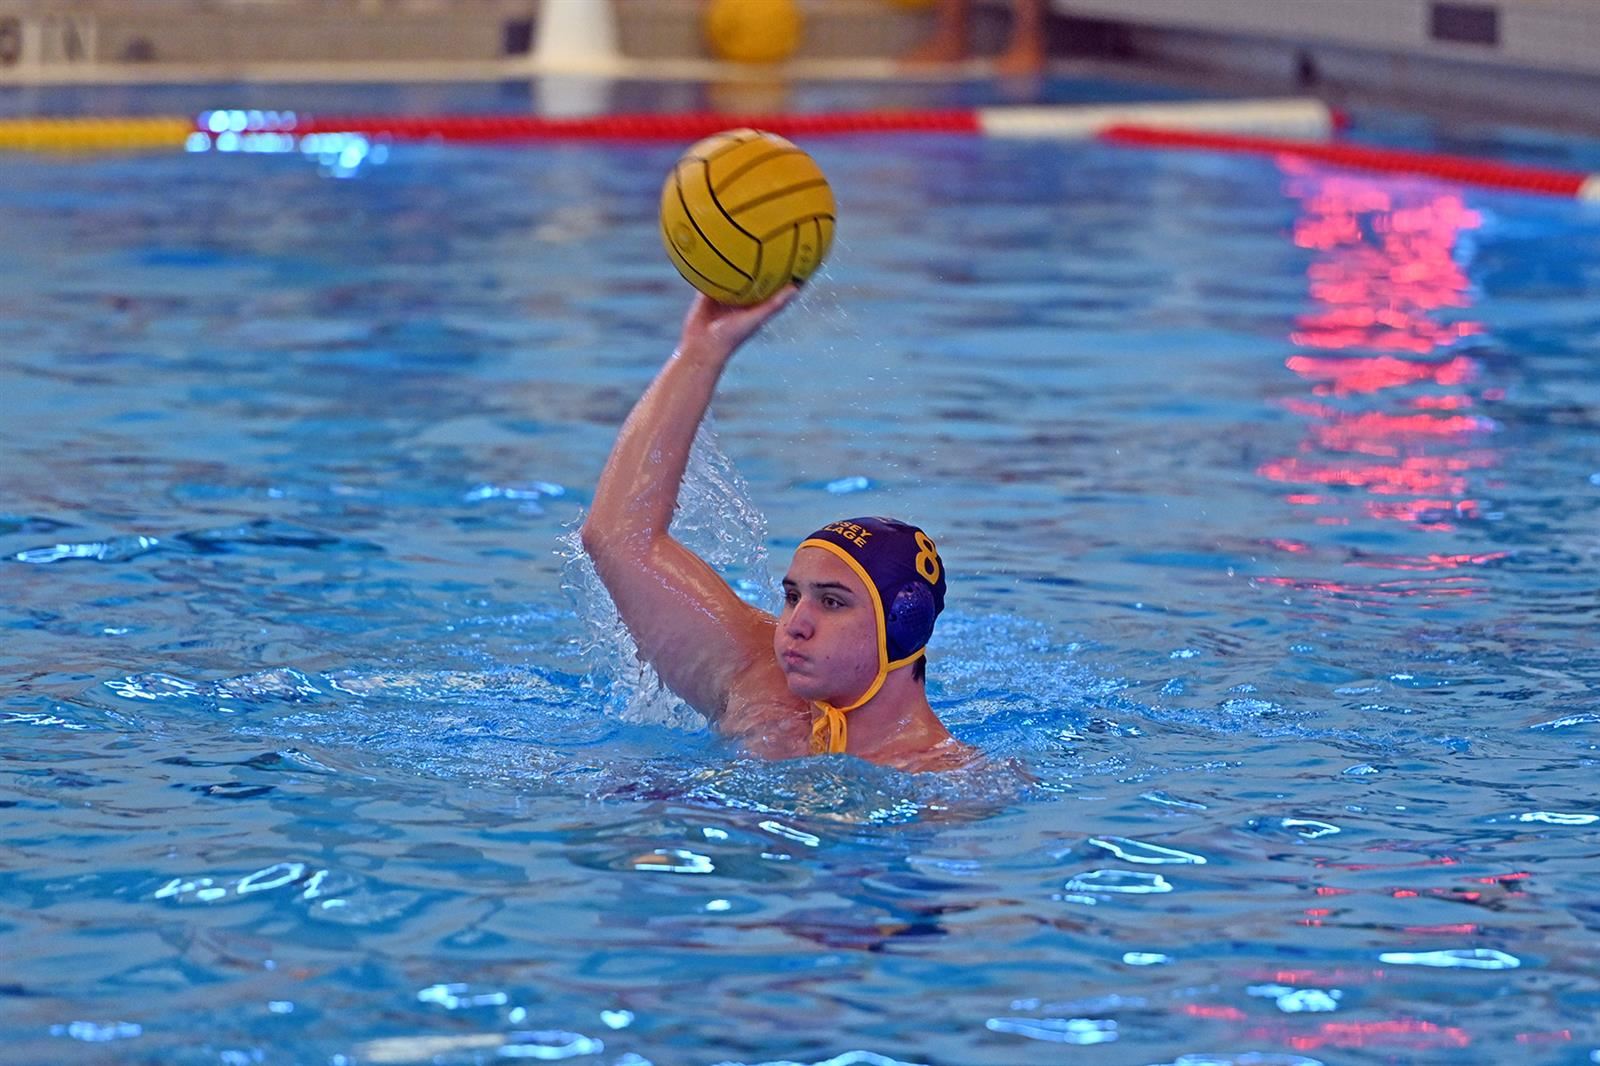 Jersey Village High School senior Ryan Orsak was voted the District 17-6A boys’ water polo Most Valuable Player.